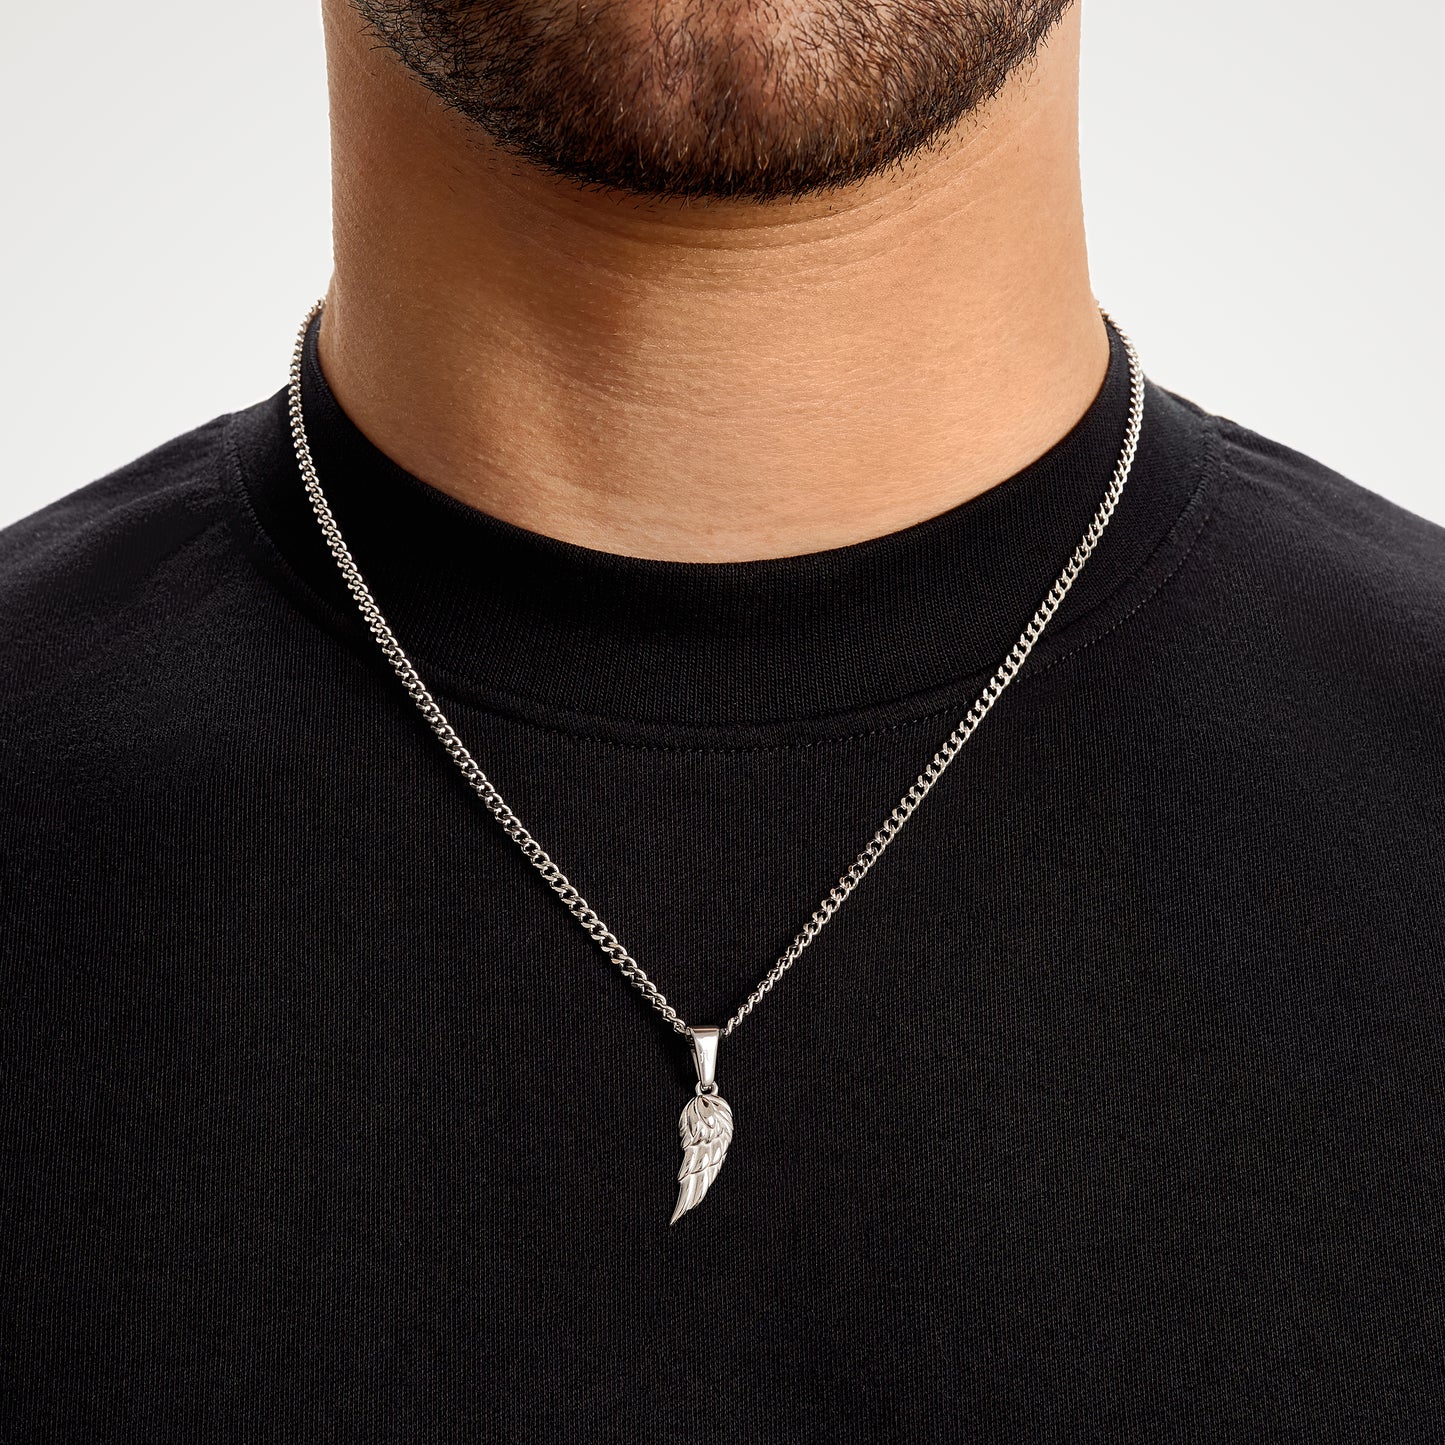 Wing necklace mens jewellery